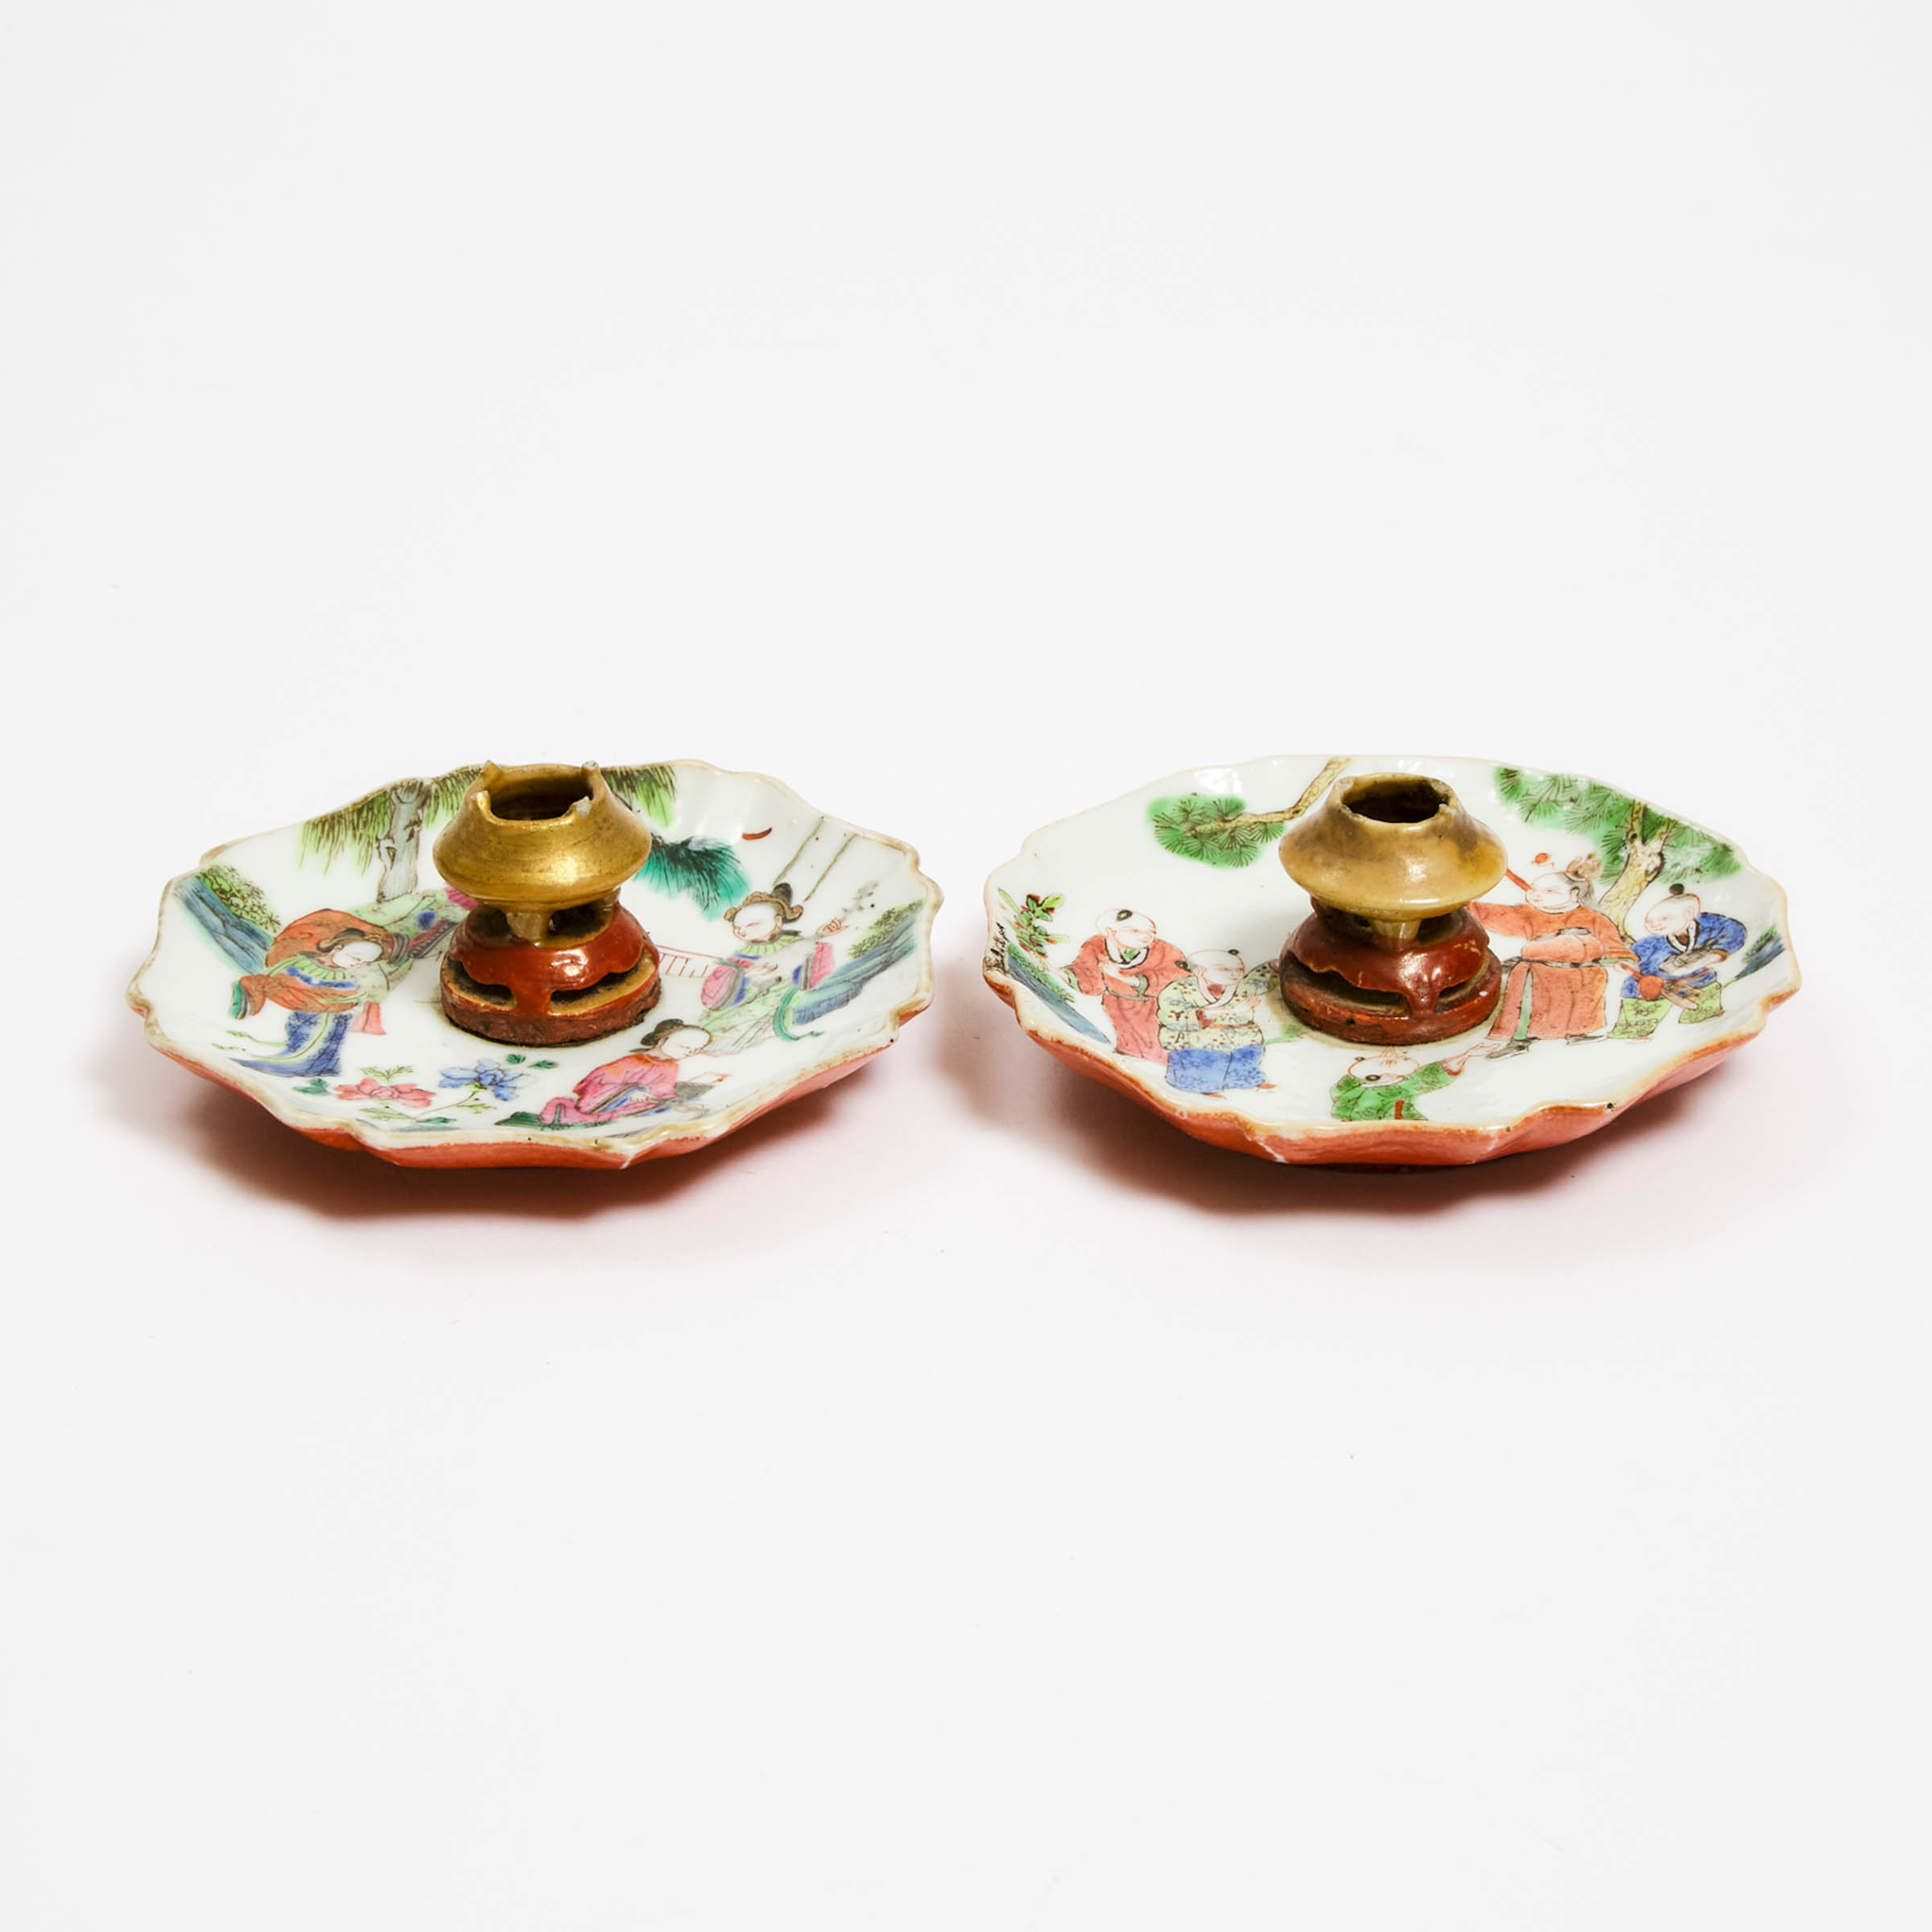 A Pair of Famille Rose 'Figural' Candle Dishes, Tongzhi Period (1862-1874)